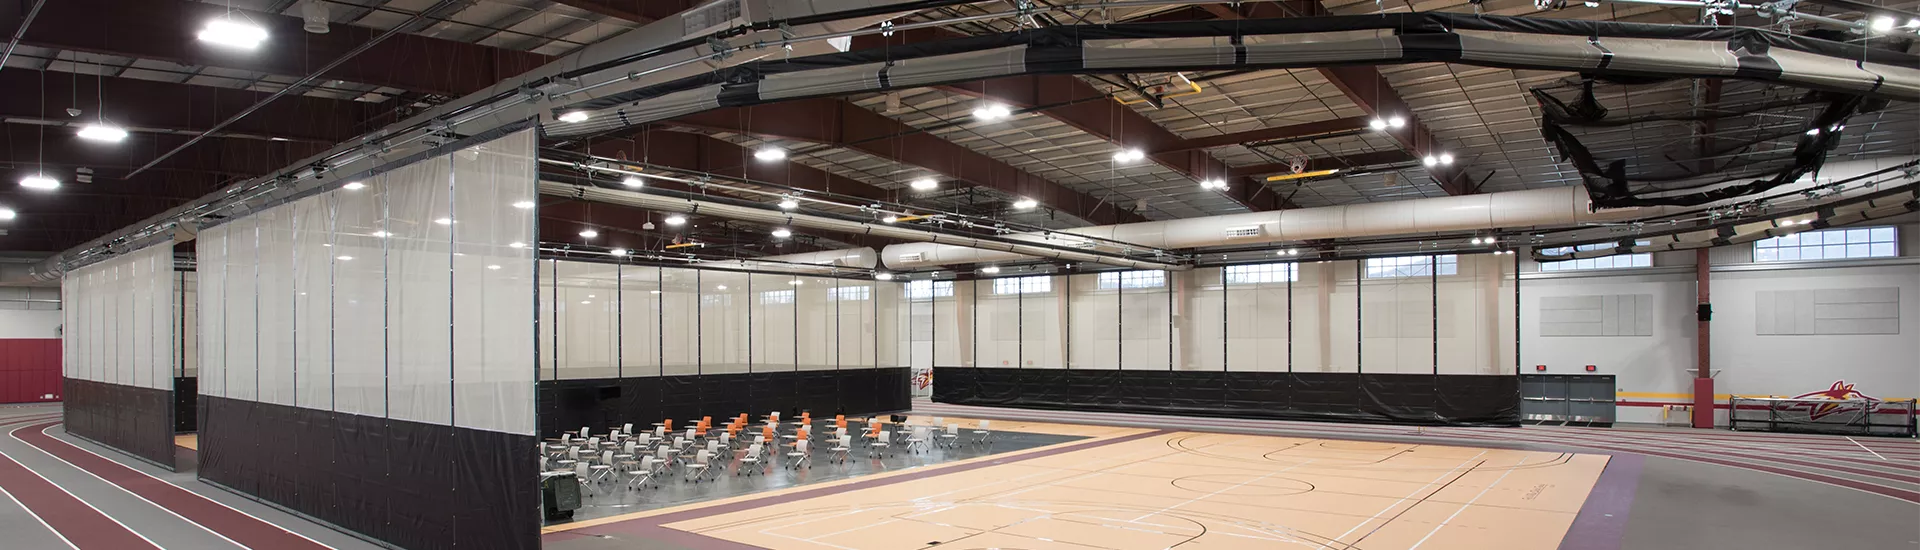 Gymnasium Dividers, Basketball Backstops, Practice Cages, Wall Pads, and Smart Gym Control System at Alvernia University.